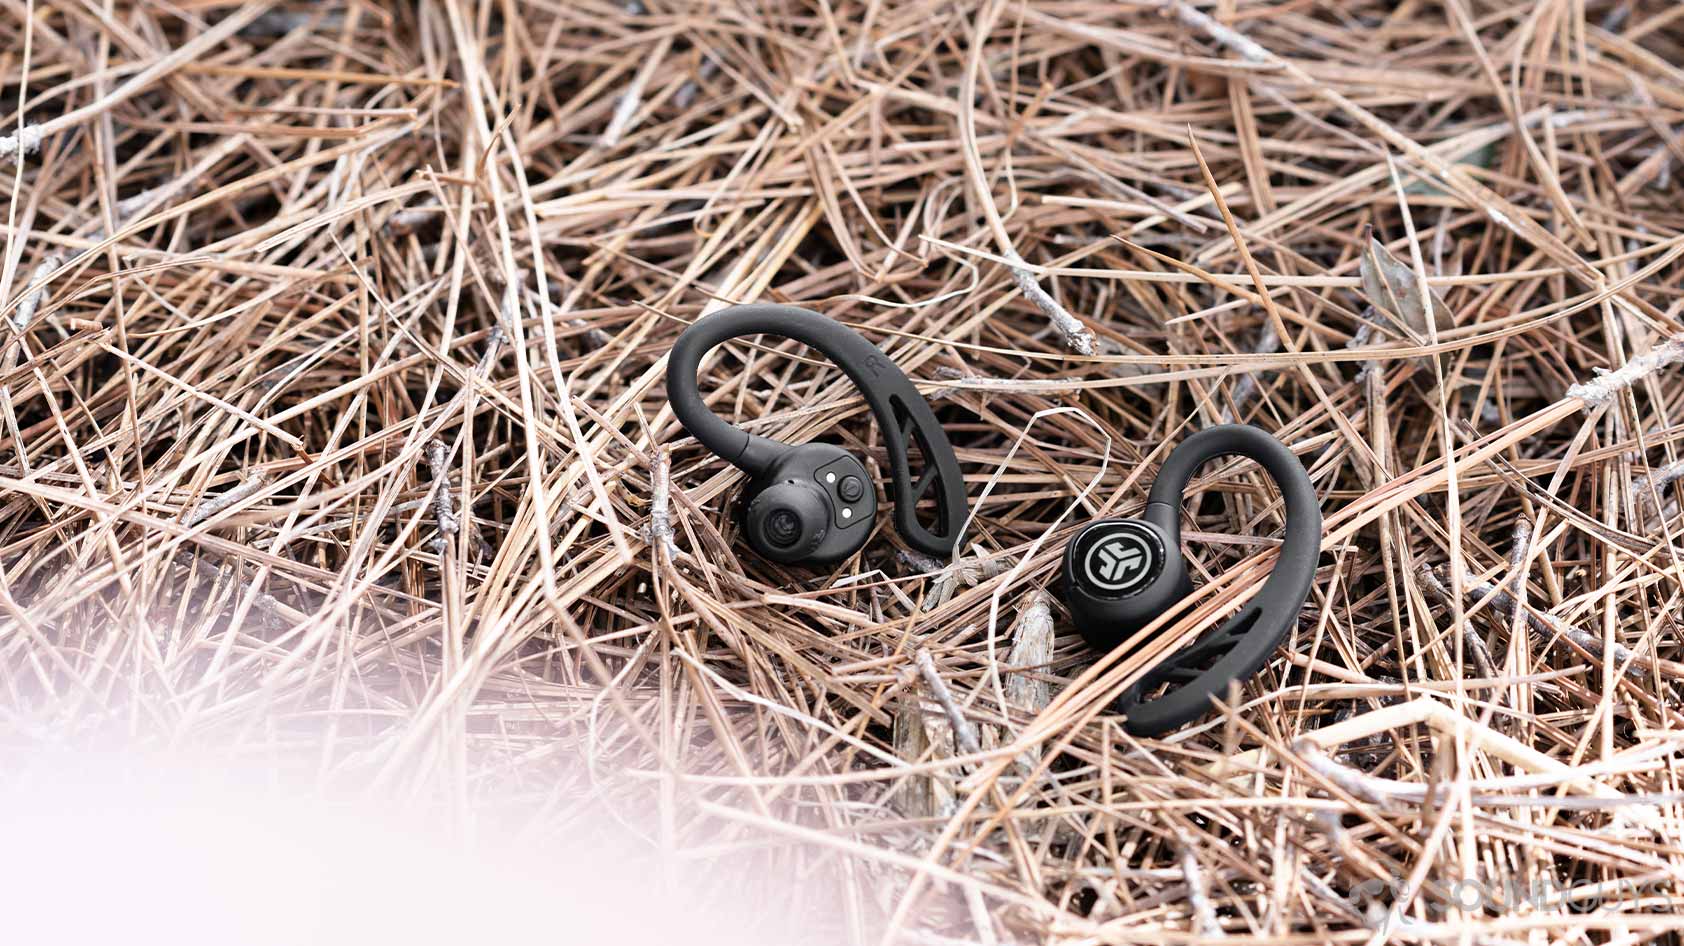 The JLab Epic Air Sport earbuds on a bed of straw.